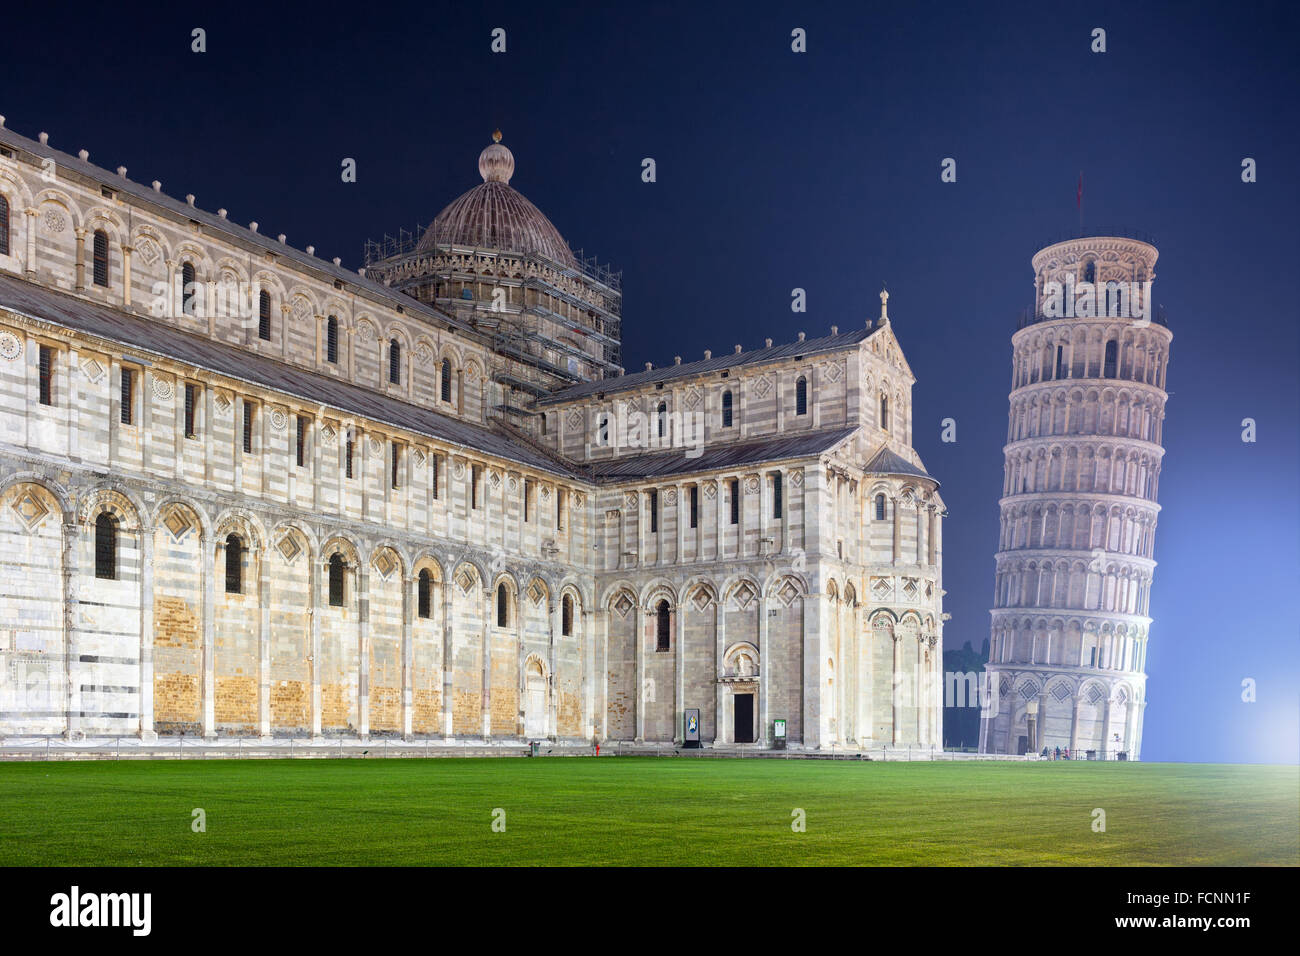 The Leaning Tower Of Pisa By Night Stock Photo